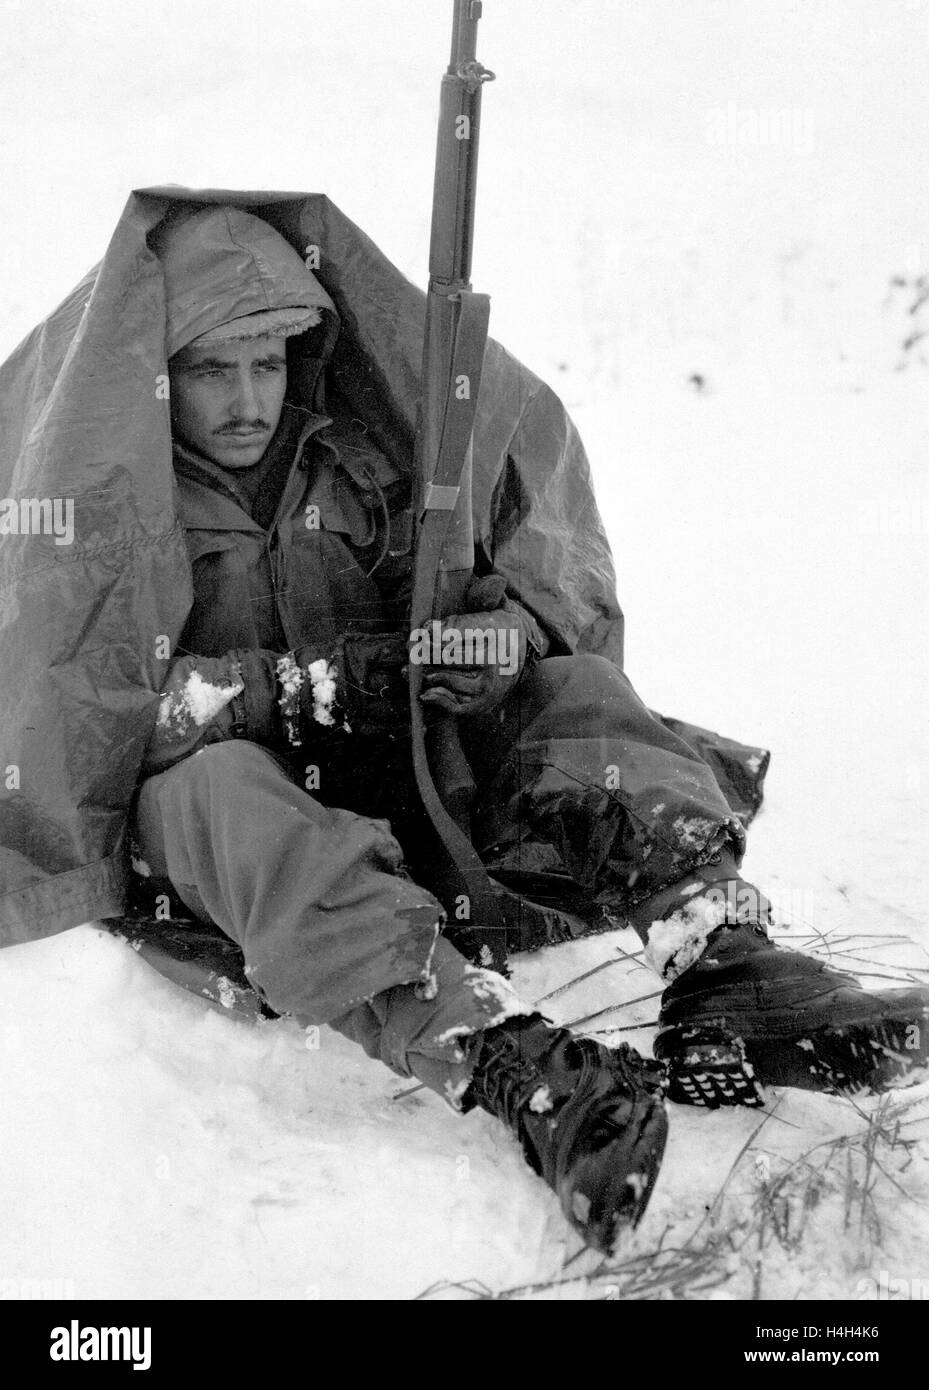 U.S. soldier Pfc. Preston McKnight, with the 19th Infantry Regiment, uses his poncho to get protection from the biting wind and cold during the Korean War January 10, 1951 in Yoju, Korea. Stock Photo